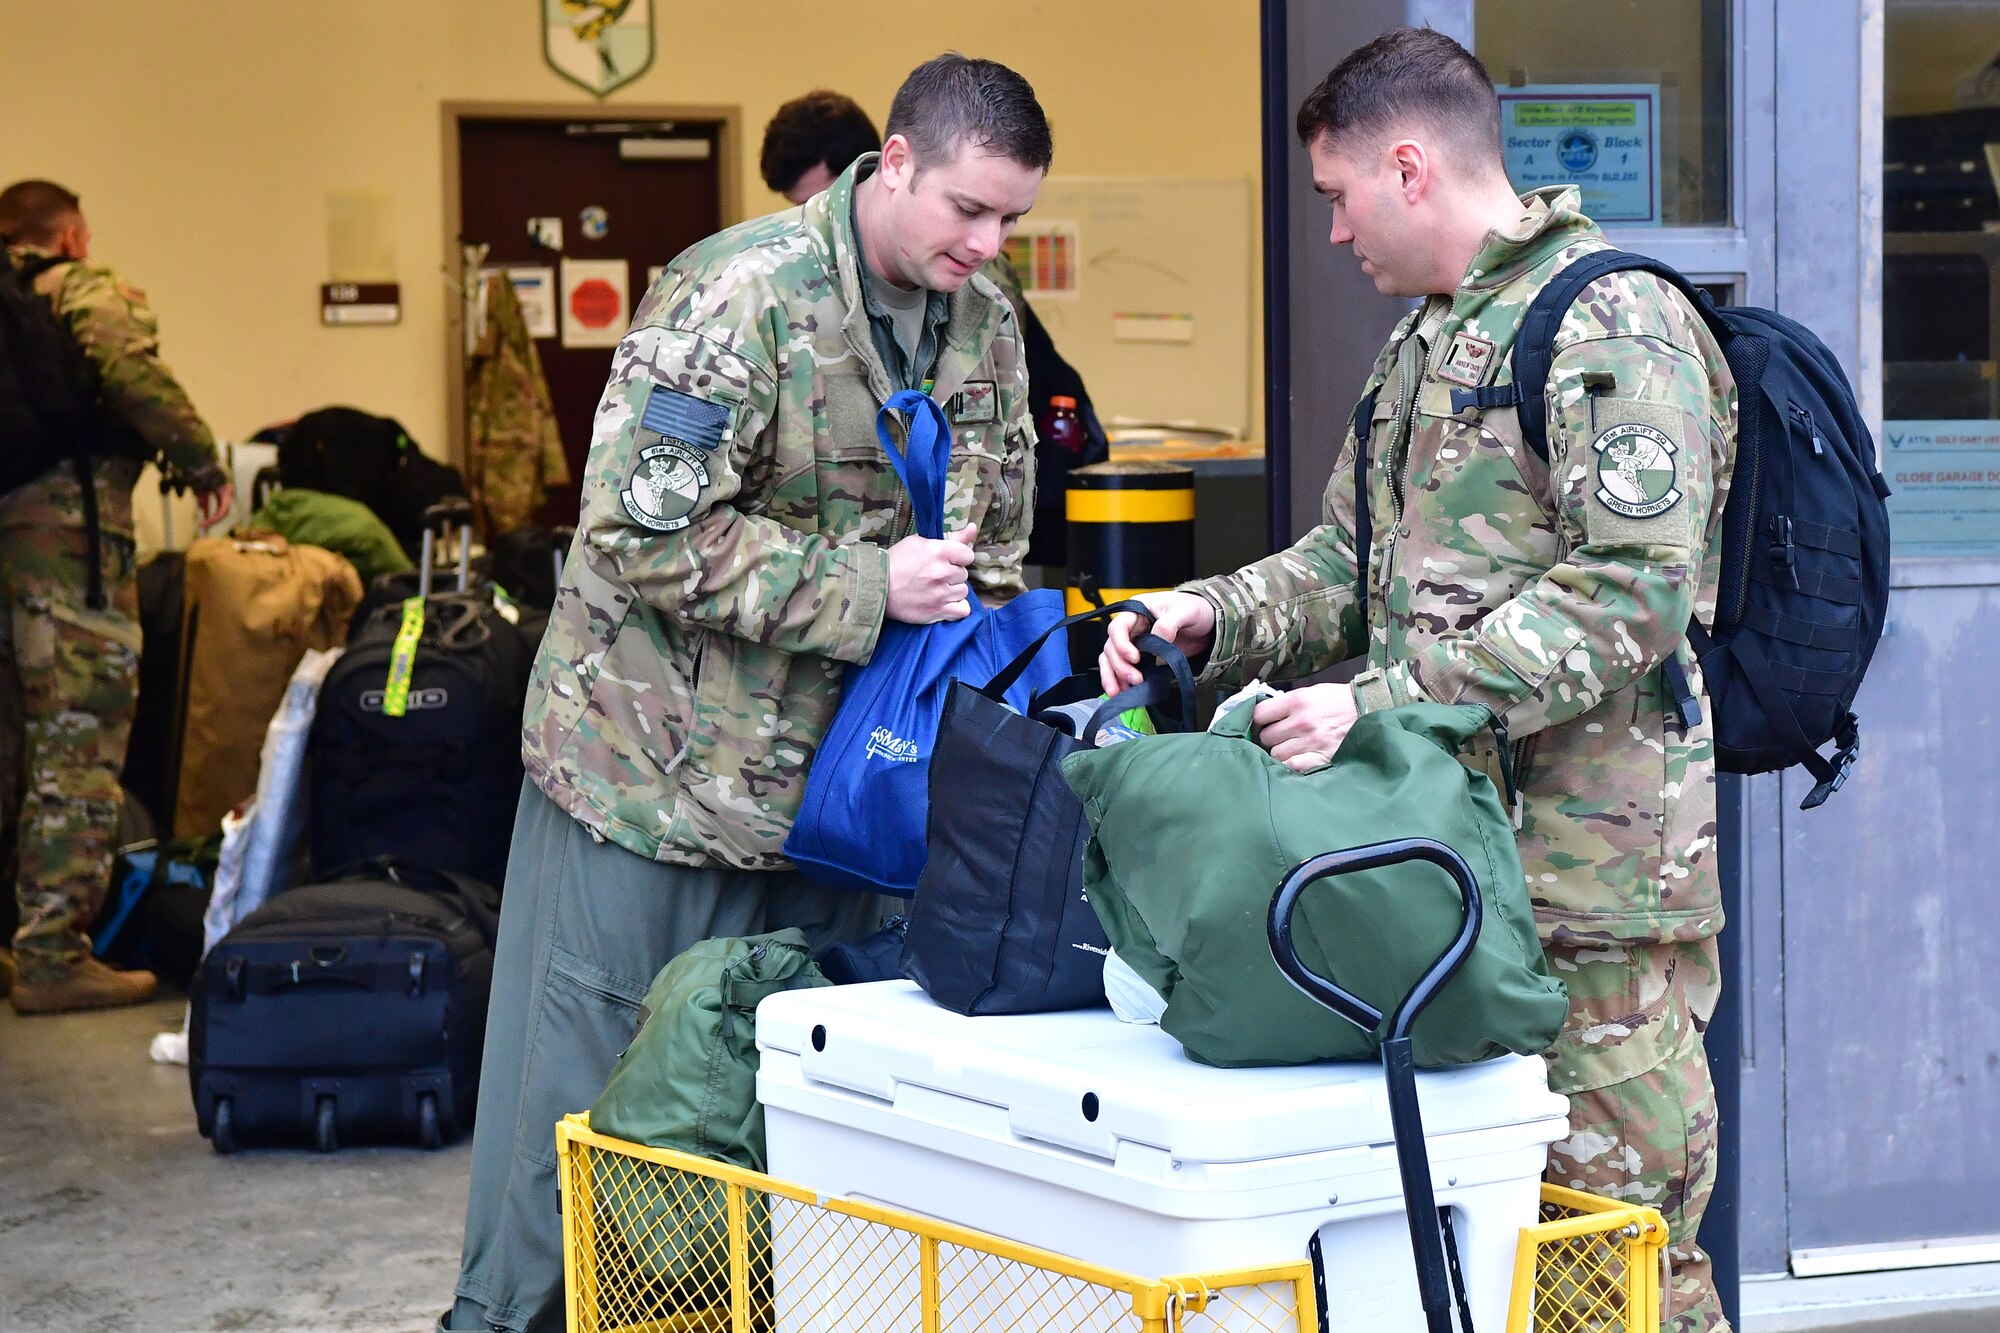 Airmen from the 61st Airlift Squadron at Little Rock Air Force Base, Arkansas, prepare to depart for a capstone exercise taking place in the Indo-Pacific Command’s area of responsibility.